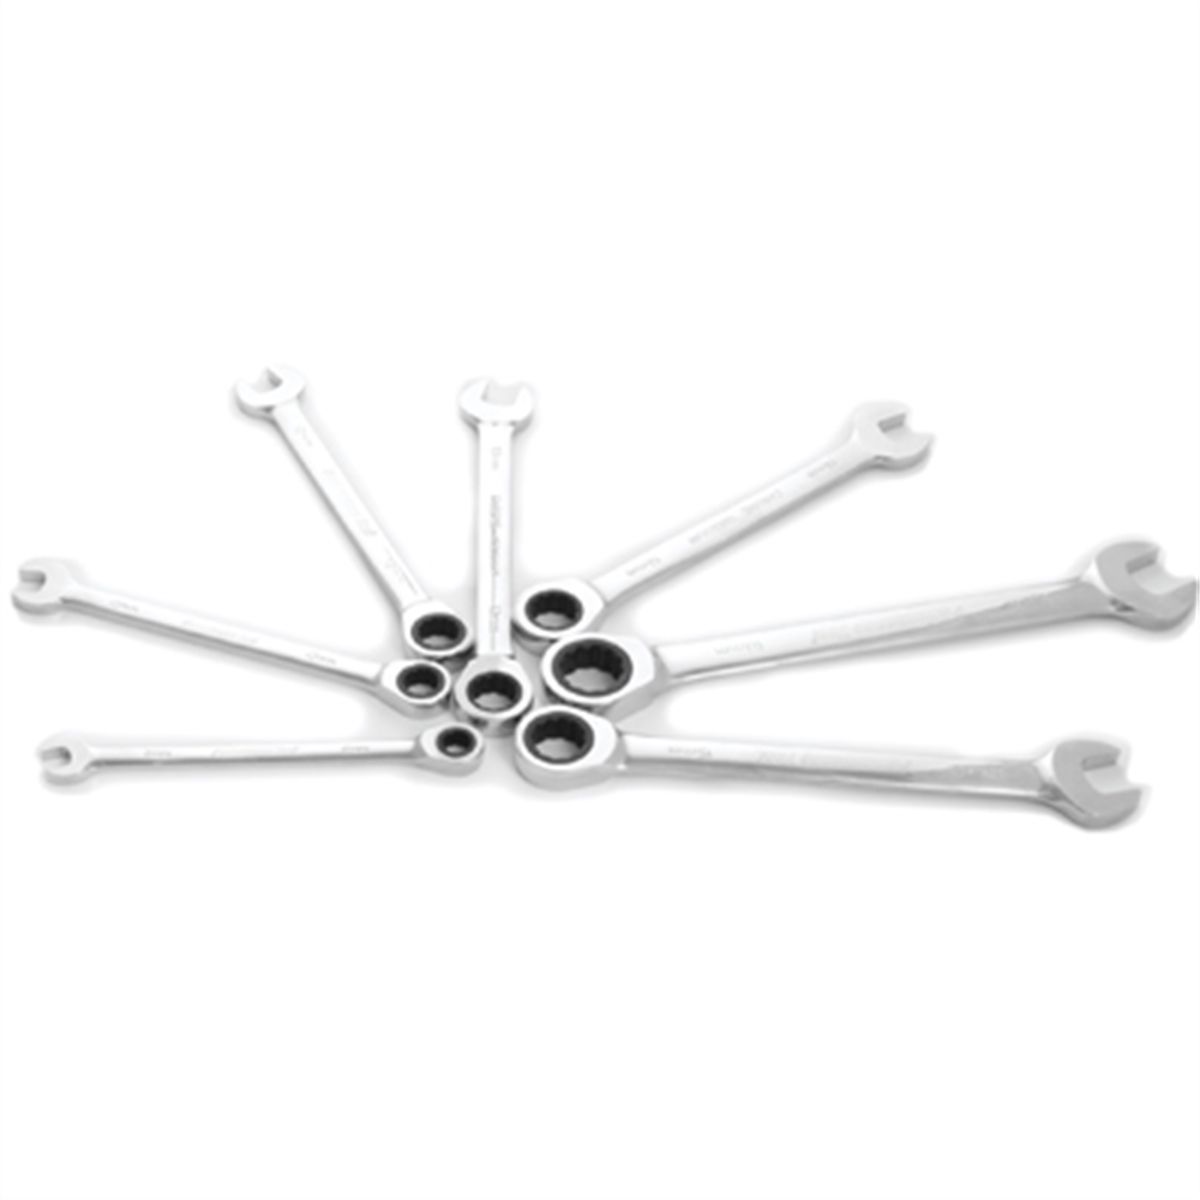 7 Pc MM Ratcheting Wrench Set